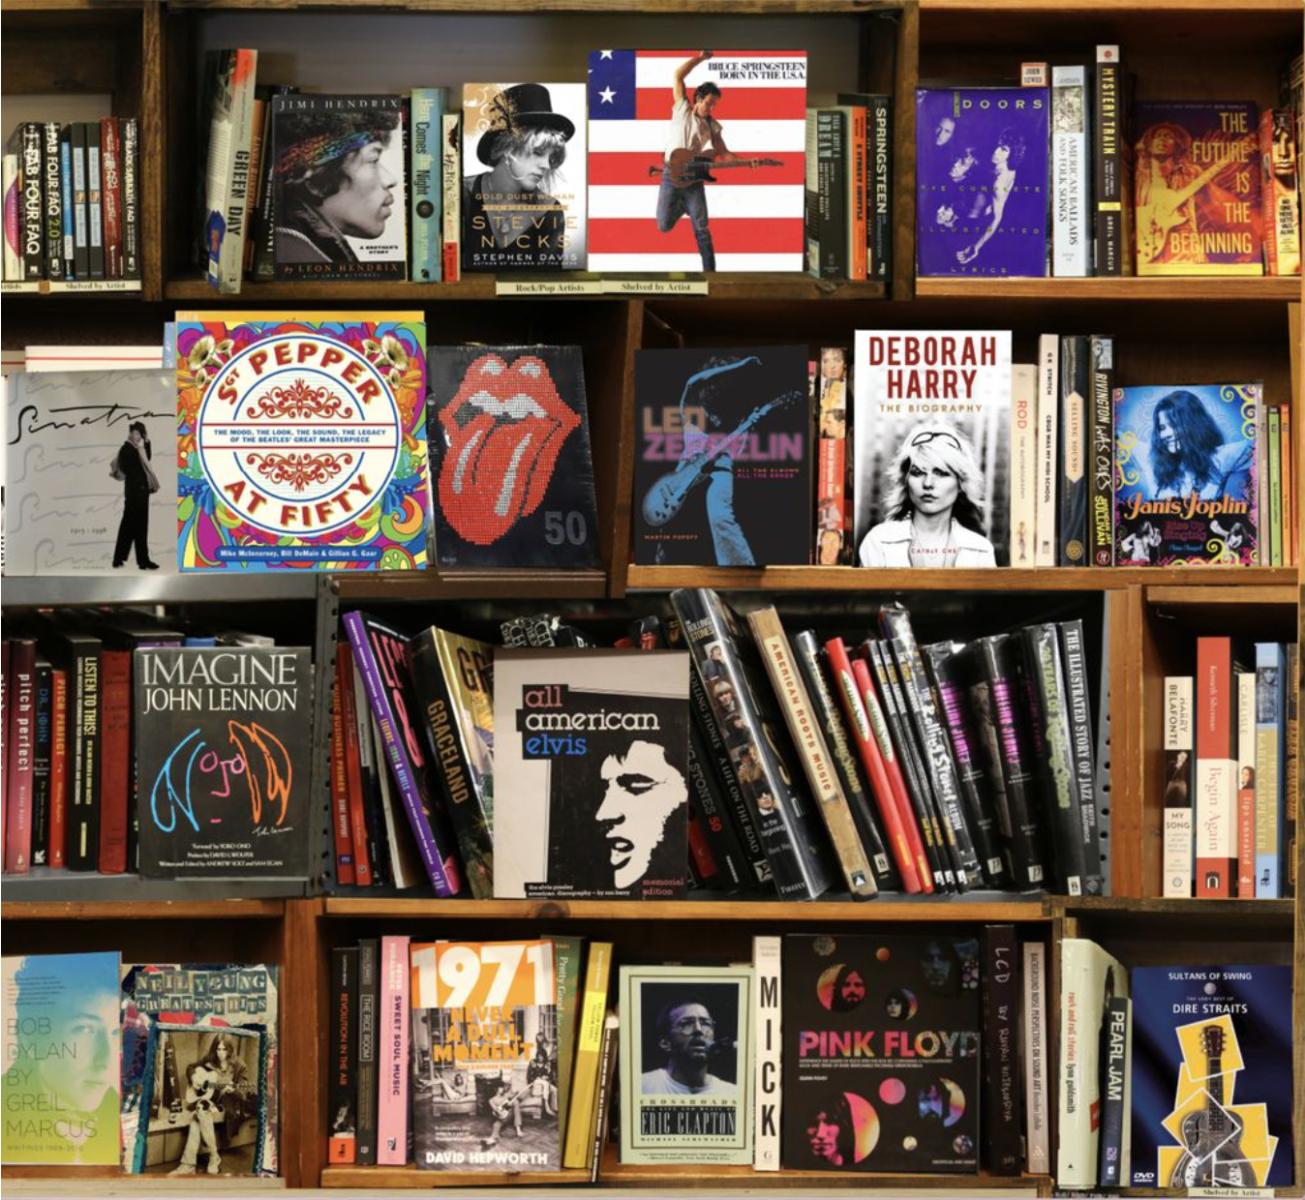 Rock SQ BookScape by Max Steven Grossman 

Individually photographed books and bookshelves. Featuring Rock & Roll artists

In his photographic series of "Bookscapes" the assembled libraries only exist in his photographs.  From photos of different